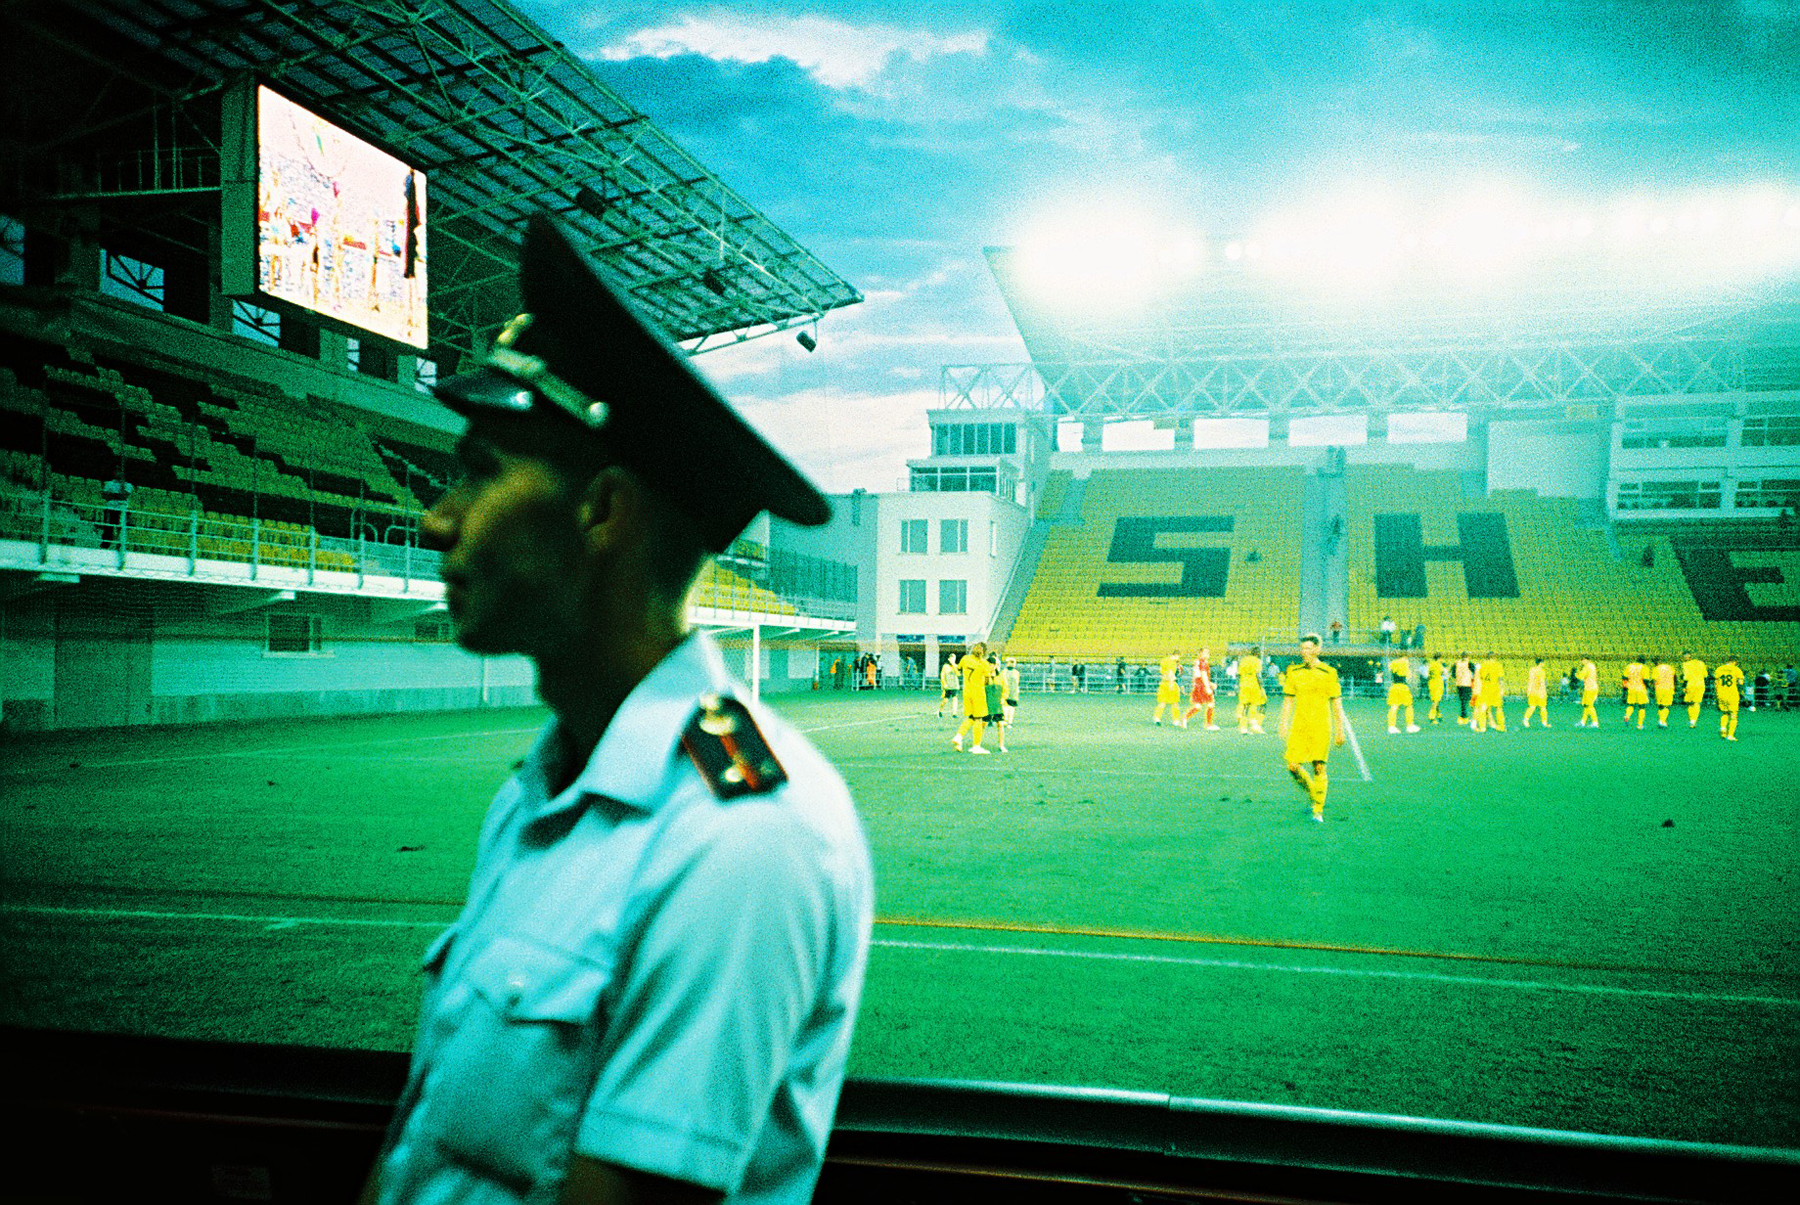 Security guard and football ground (Pic: Stephen Dowling)